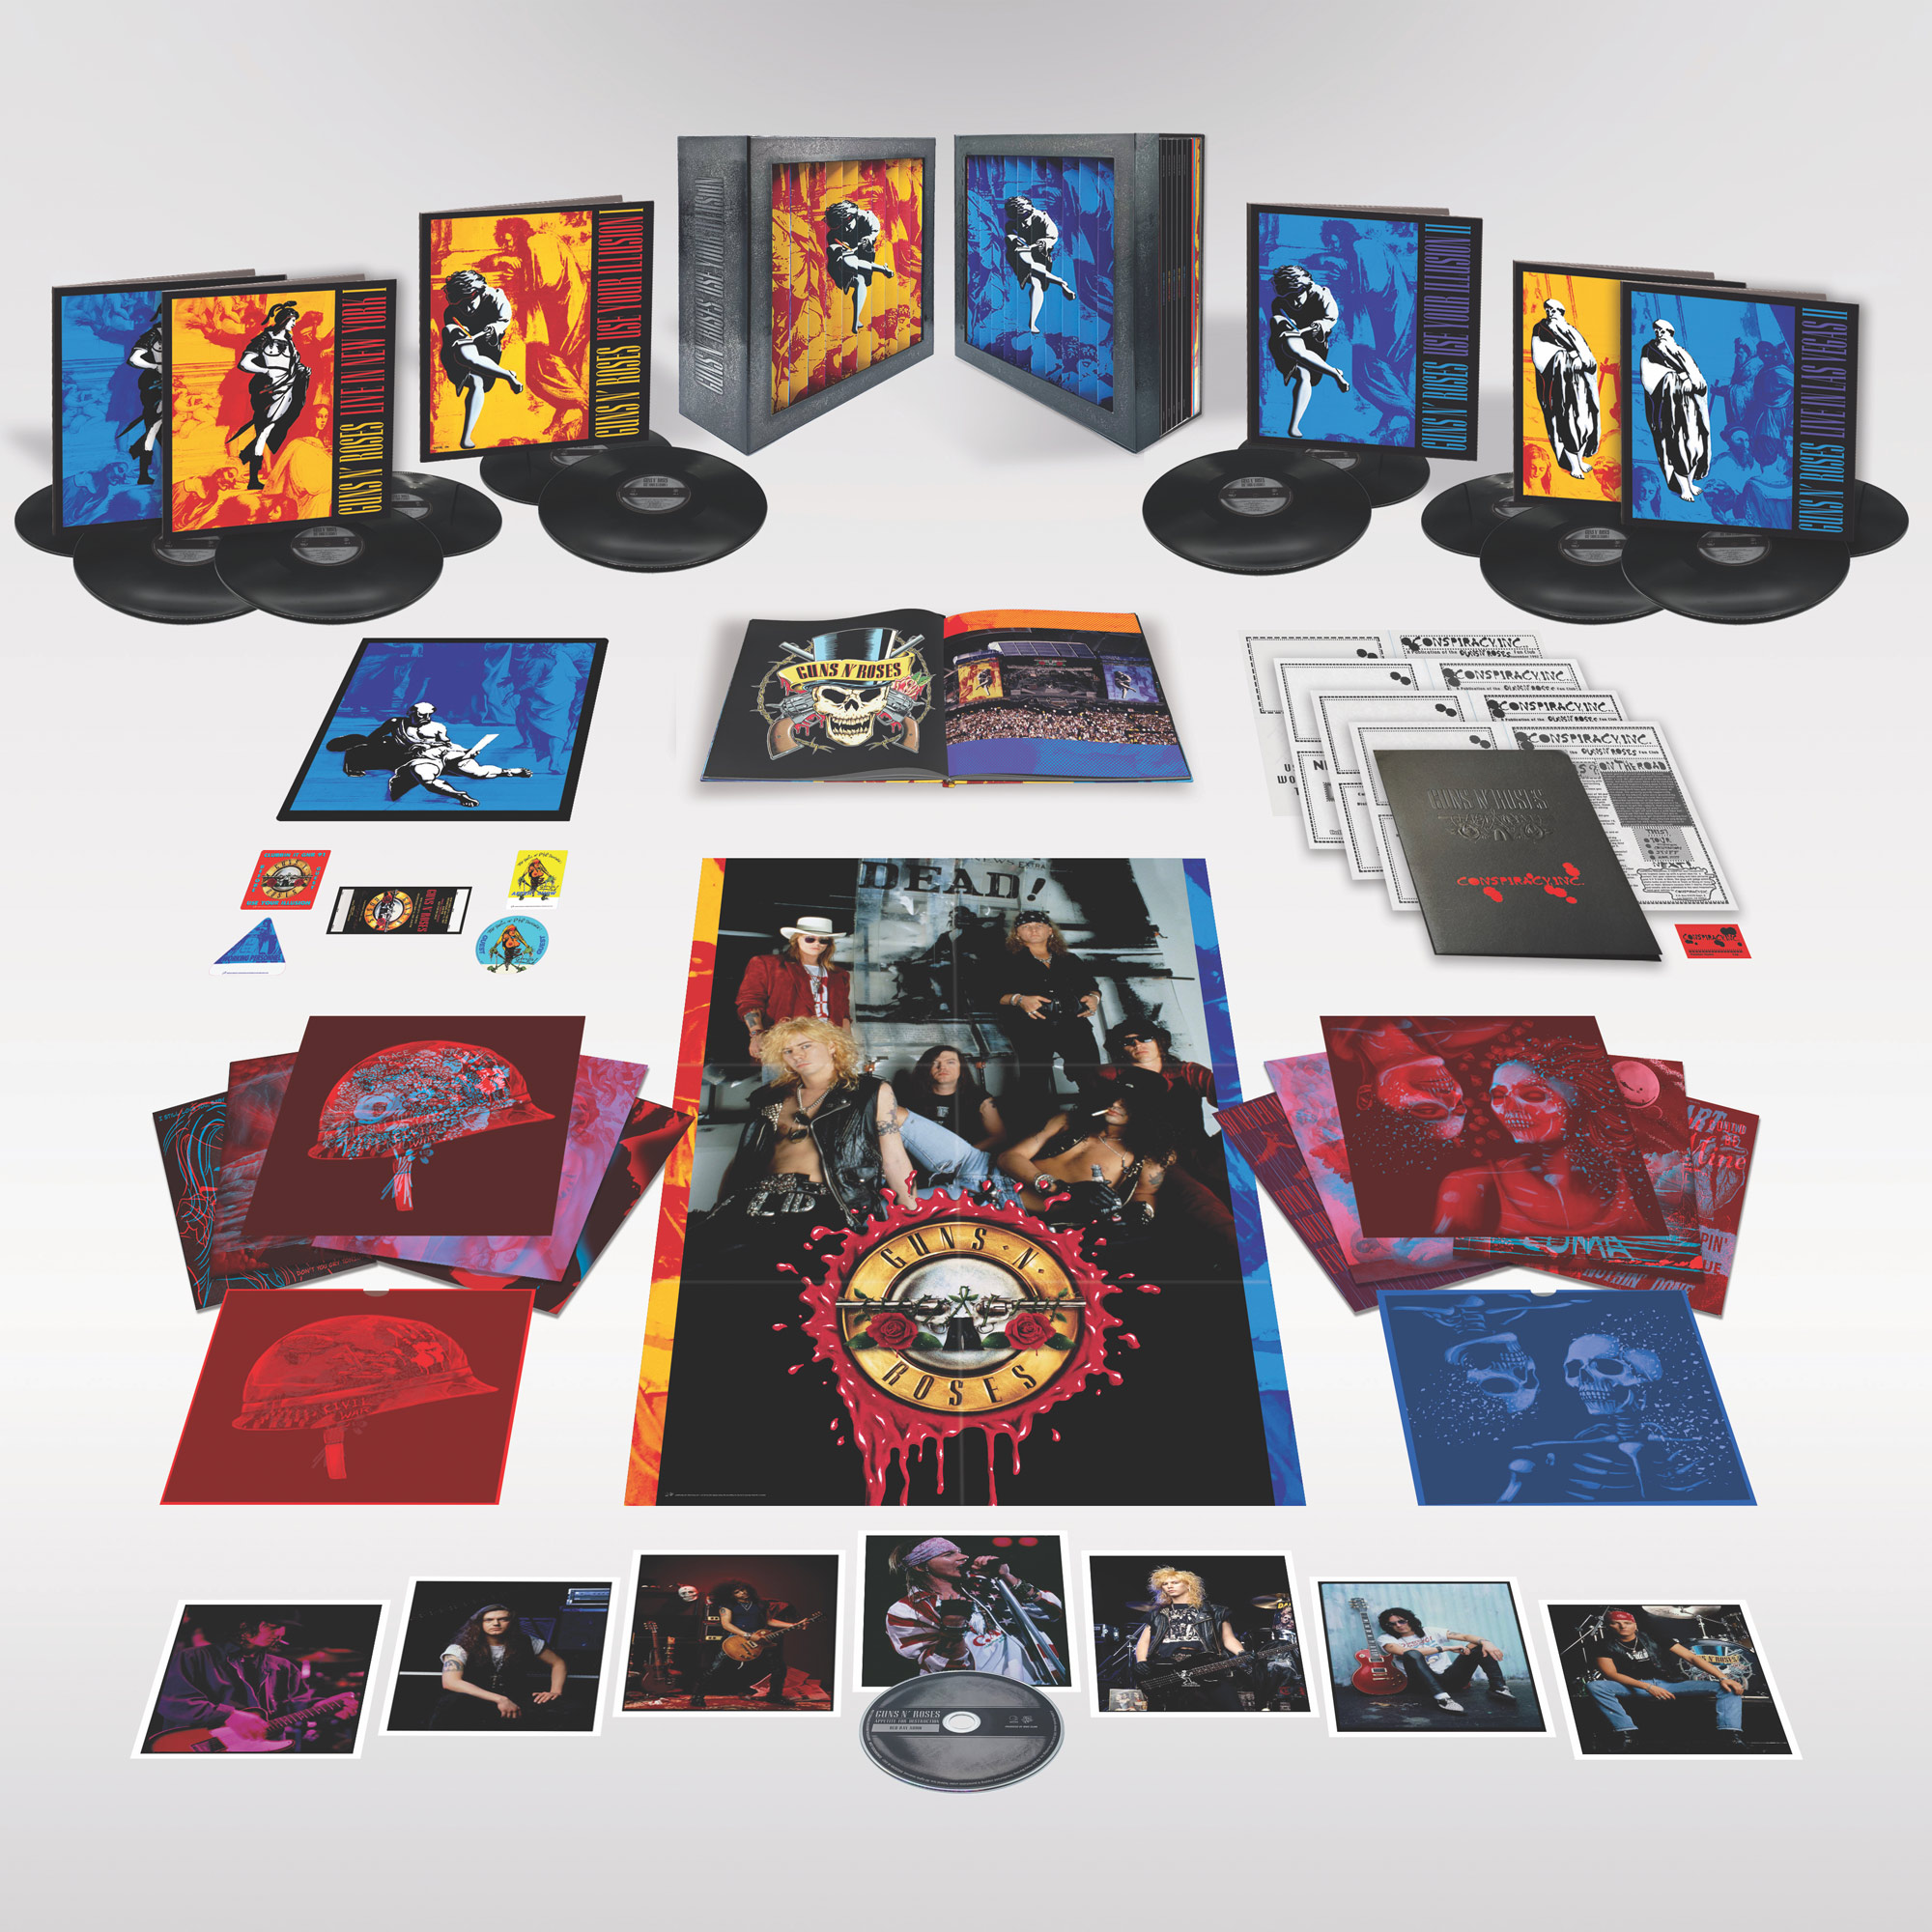 Guns N' Roses / Use Your Illusion box sets – SuperDeluxeEdition